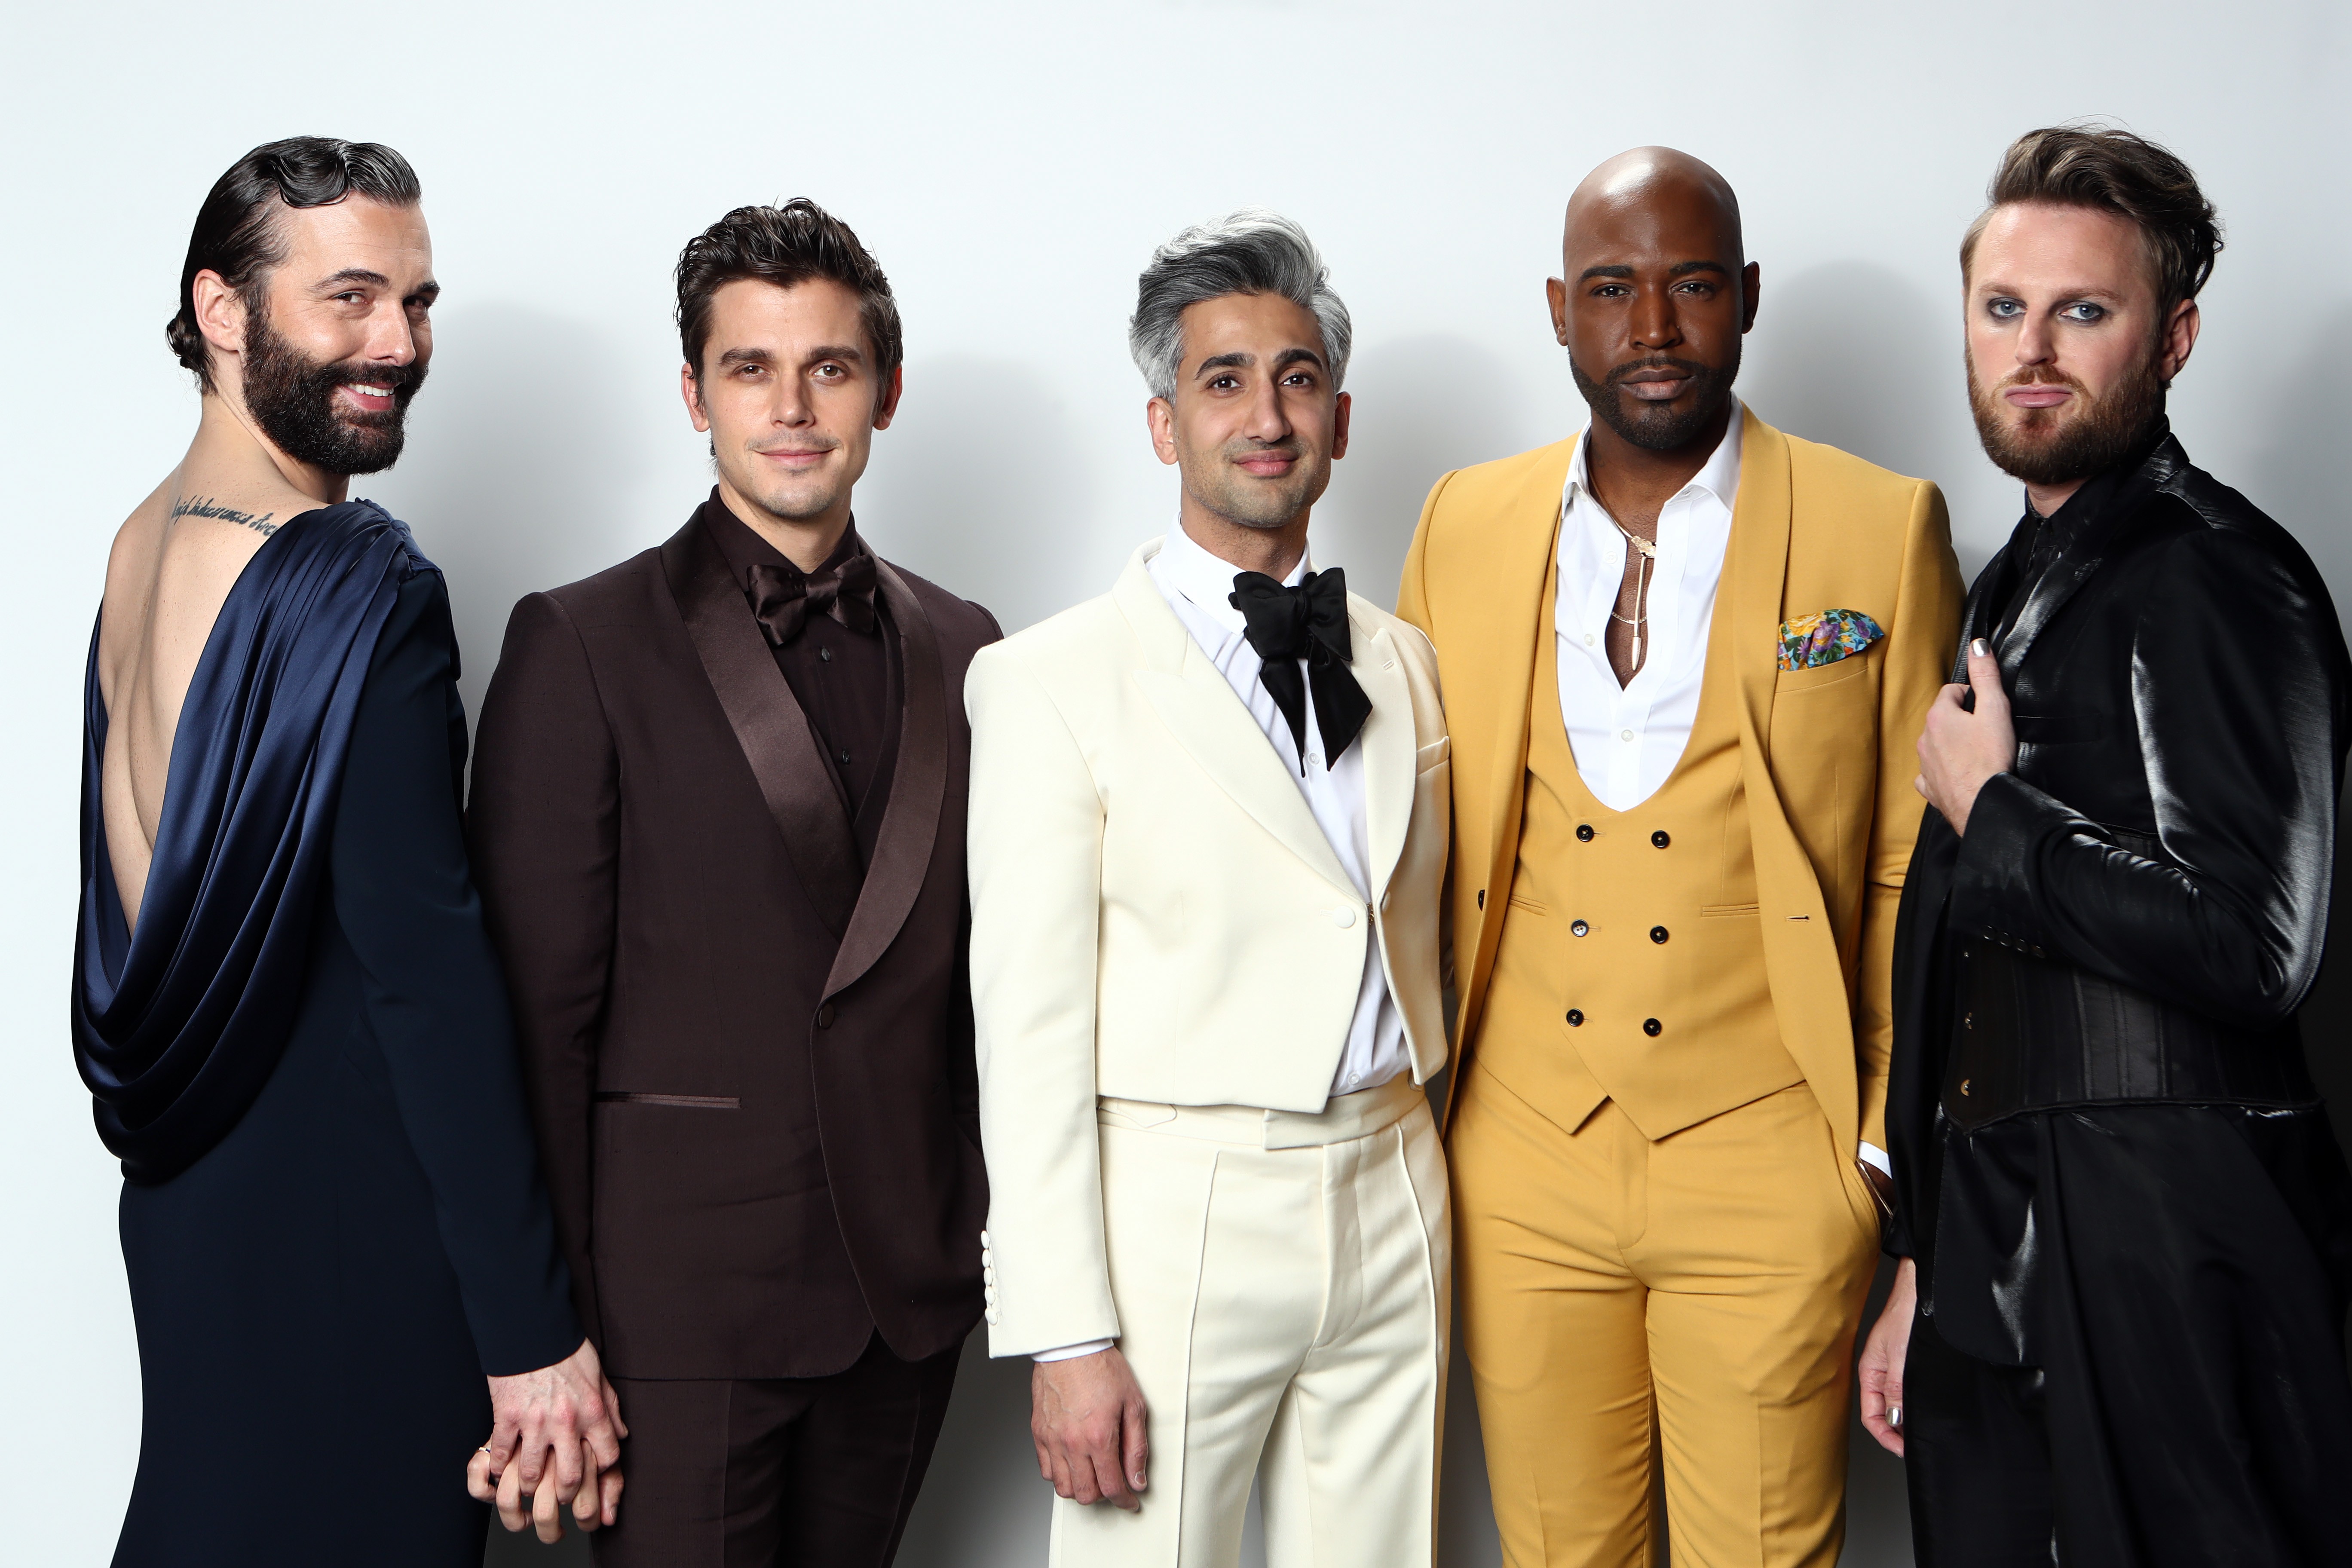 LOS ANGELES, CALIFORNIA - FEBRUARY 09:  (L-R) Jonathan Van Ness, Antoni Porowski, Tan France,  Karamo Brown and Bobby Berk attend IMDb LIVE Presented By M&M'S At The Elton John AIDS Foundation Academy Awards Viewing Party on February 09, 2020 in Los Angel (Foto: Getty Images for IMDb)